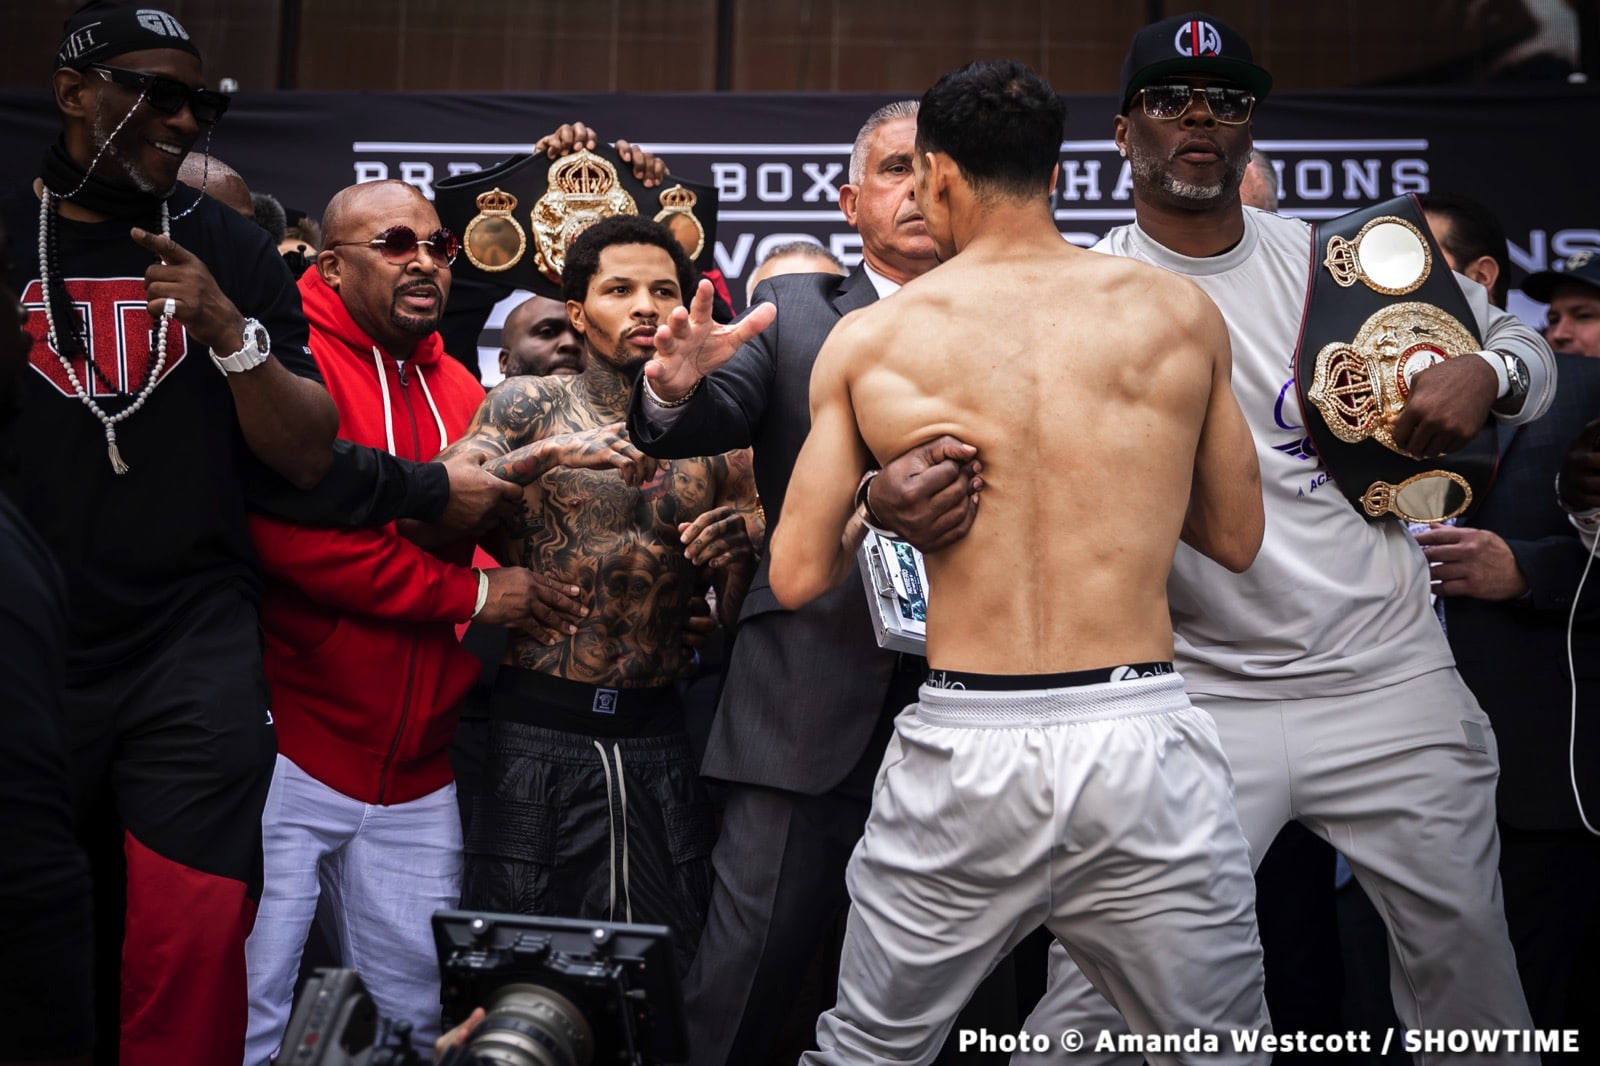 Image: Tank Davis loses self-control, shoves Rolly Romero off stage at weigh-in